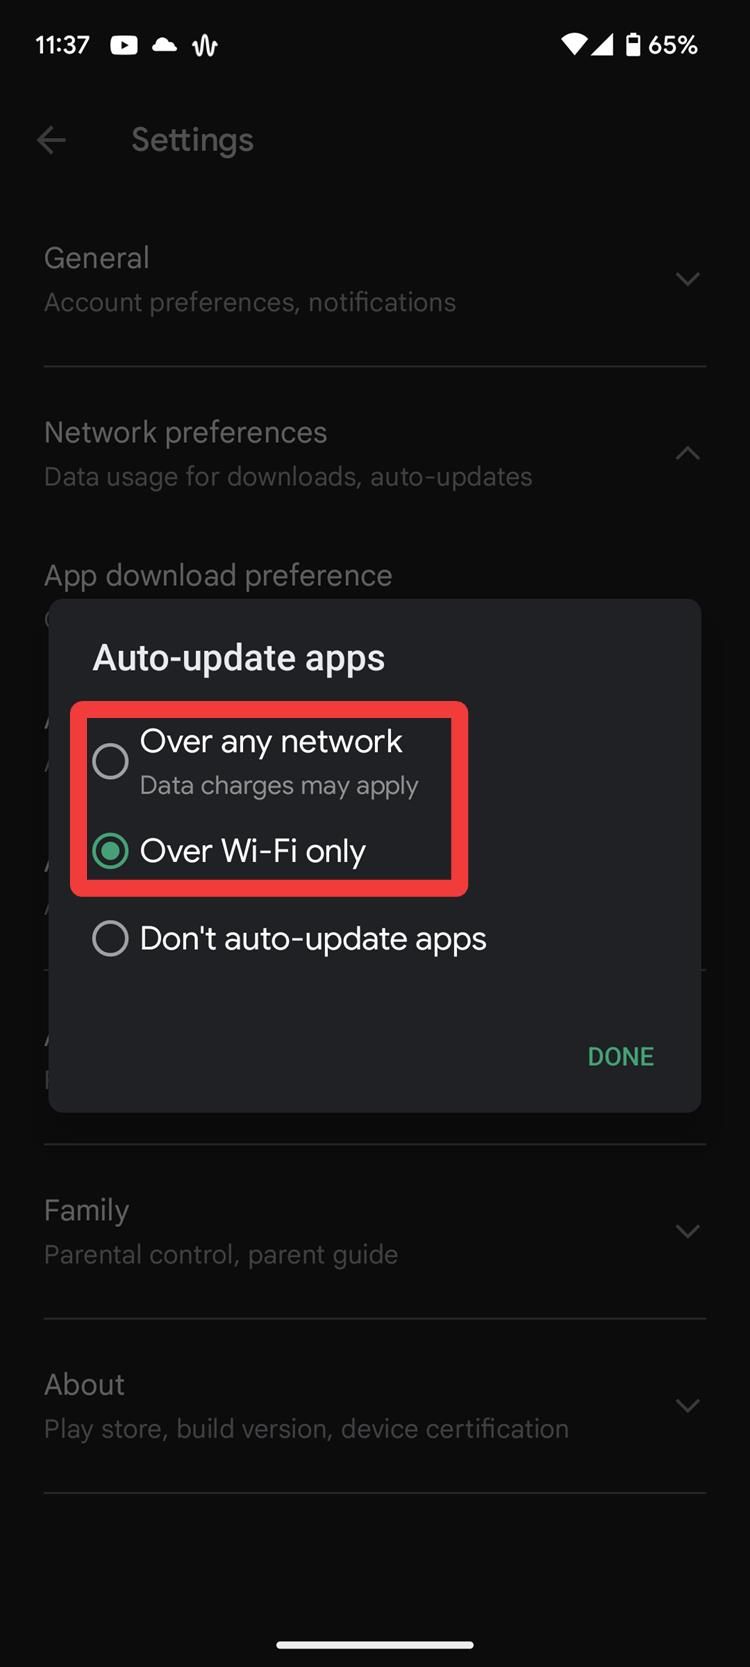 The Google Play Store Auto-update apps dialog box with a red box around the Over any network and Over Wi-fi only options